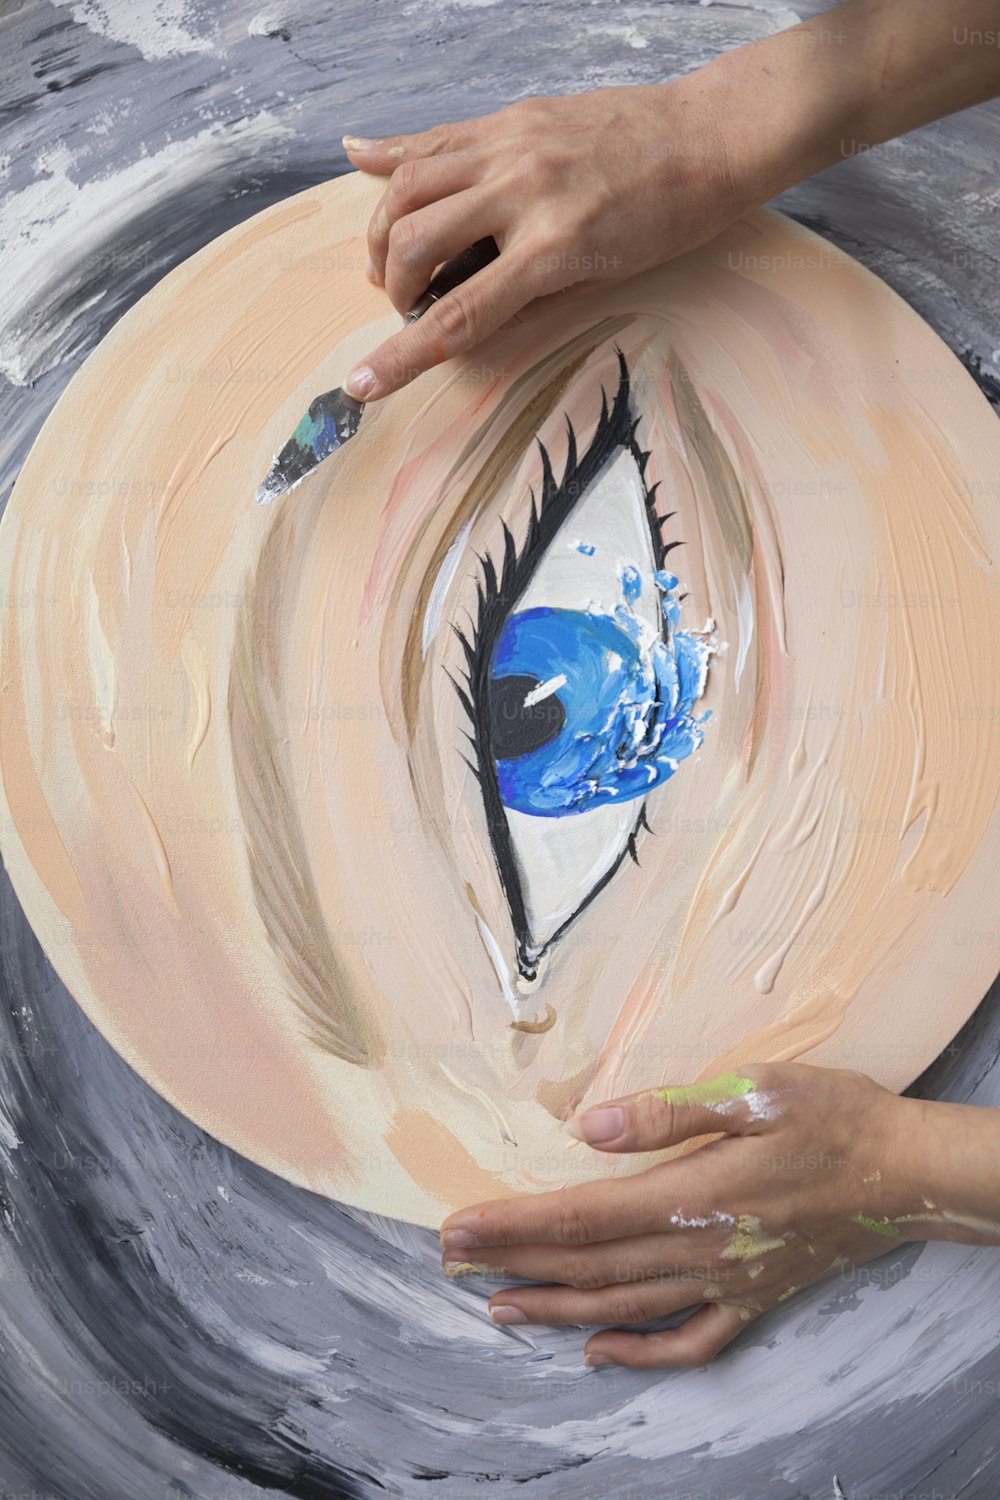 a painting of a blue eye being painted on a plate